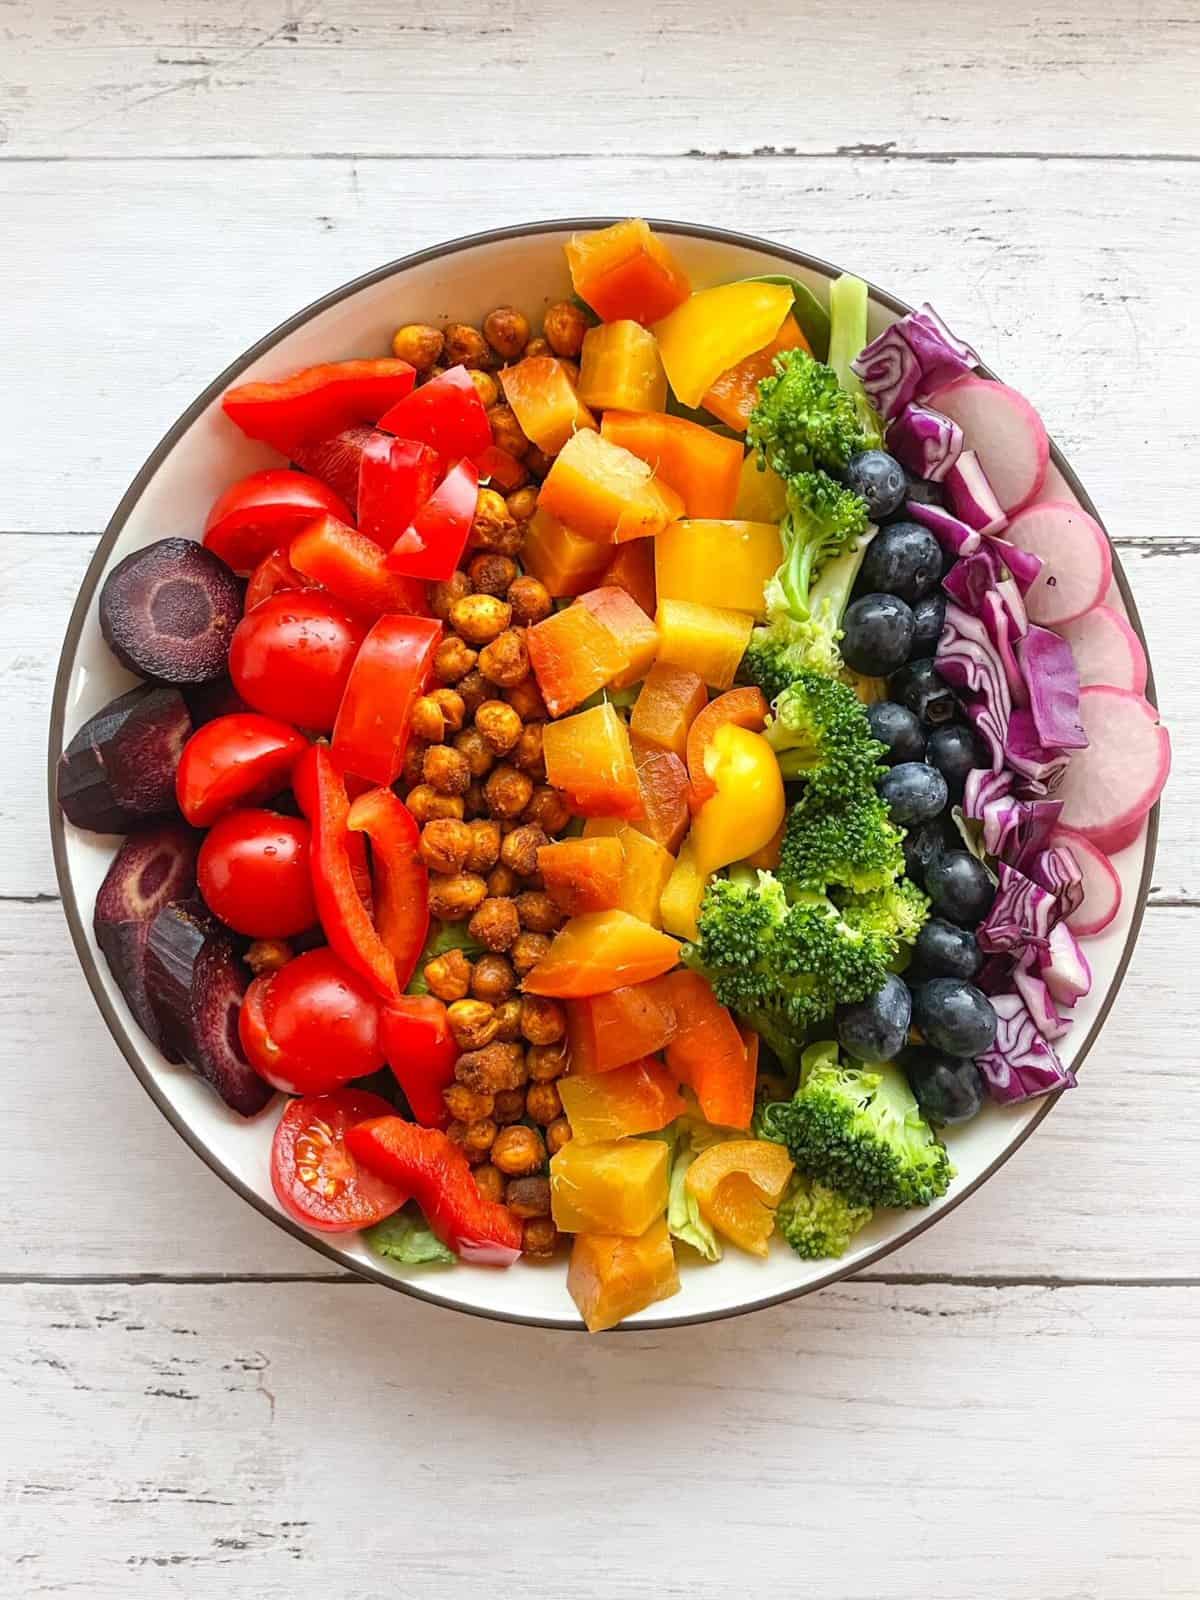 bowl filled with foods in rainbow order including purple carrots, tomatoes, red pepper, chickpeas, orange and yellow pepper, broccoli, blueberries, red onion, and radishes.